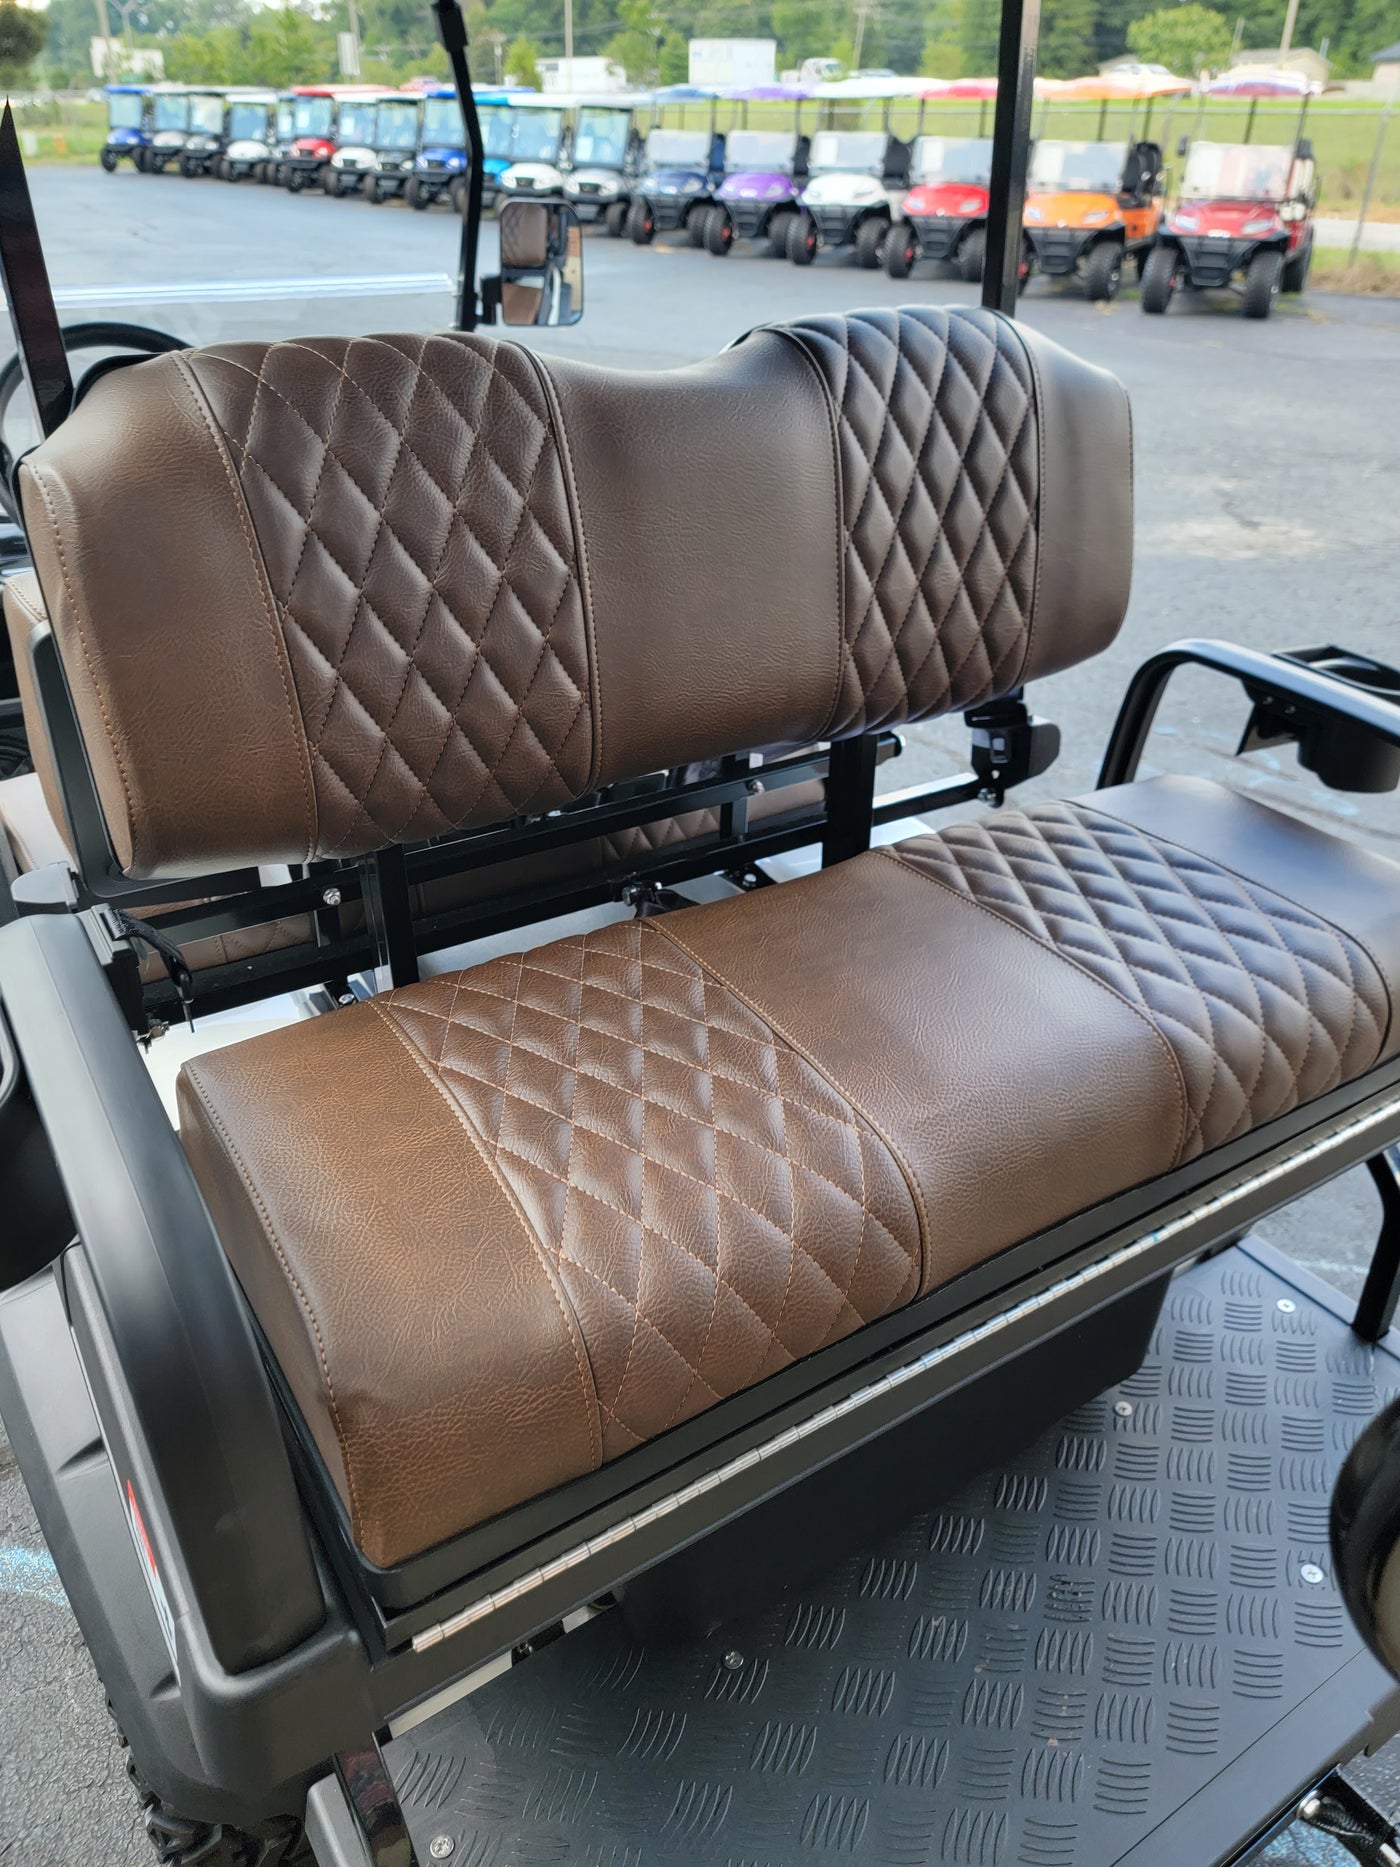 Evolution EV Golf Cart Custom Diamond Stich Seat Covers Chocolate Brown Diamond Stich fits Evolutions Classic Pro & Plus, Carrier & Forester Models